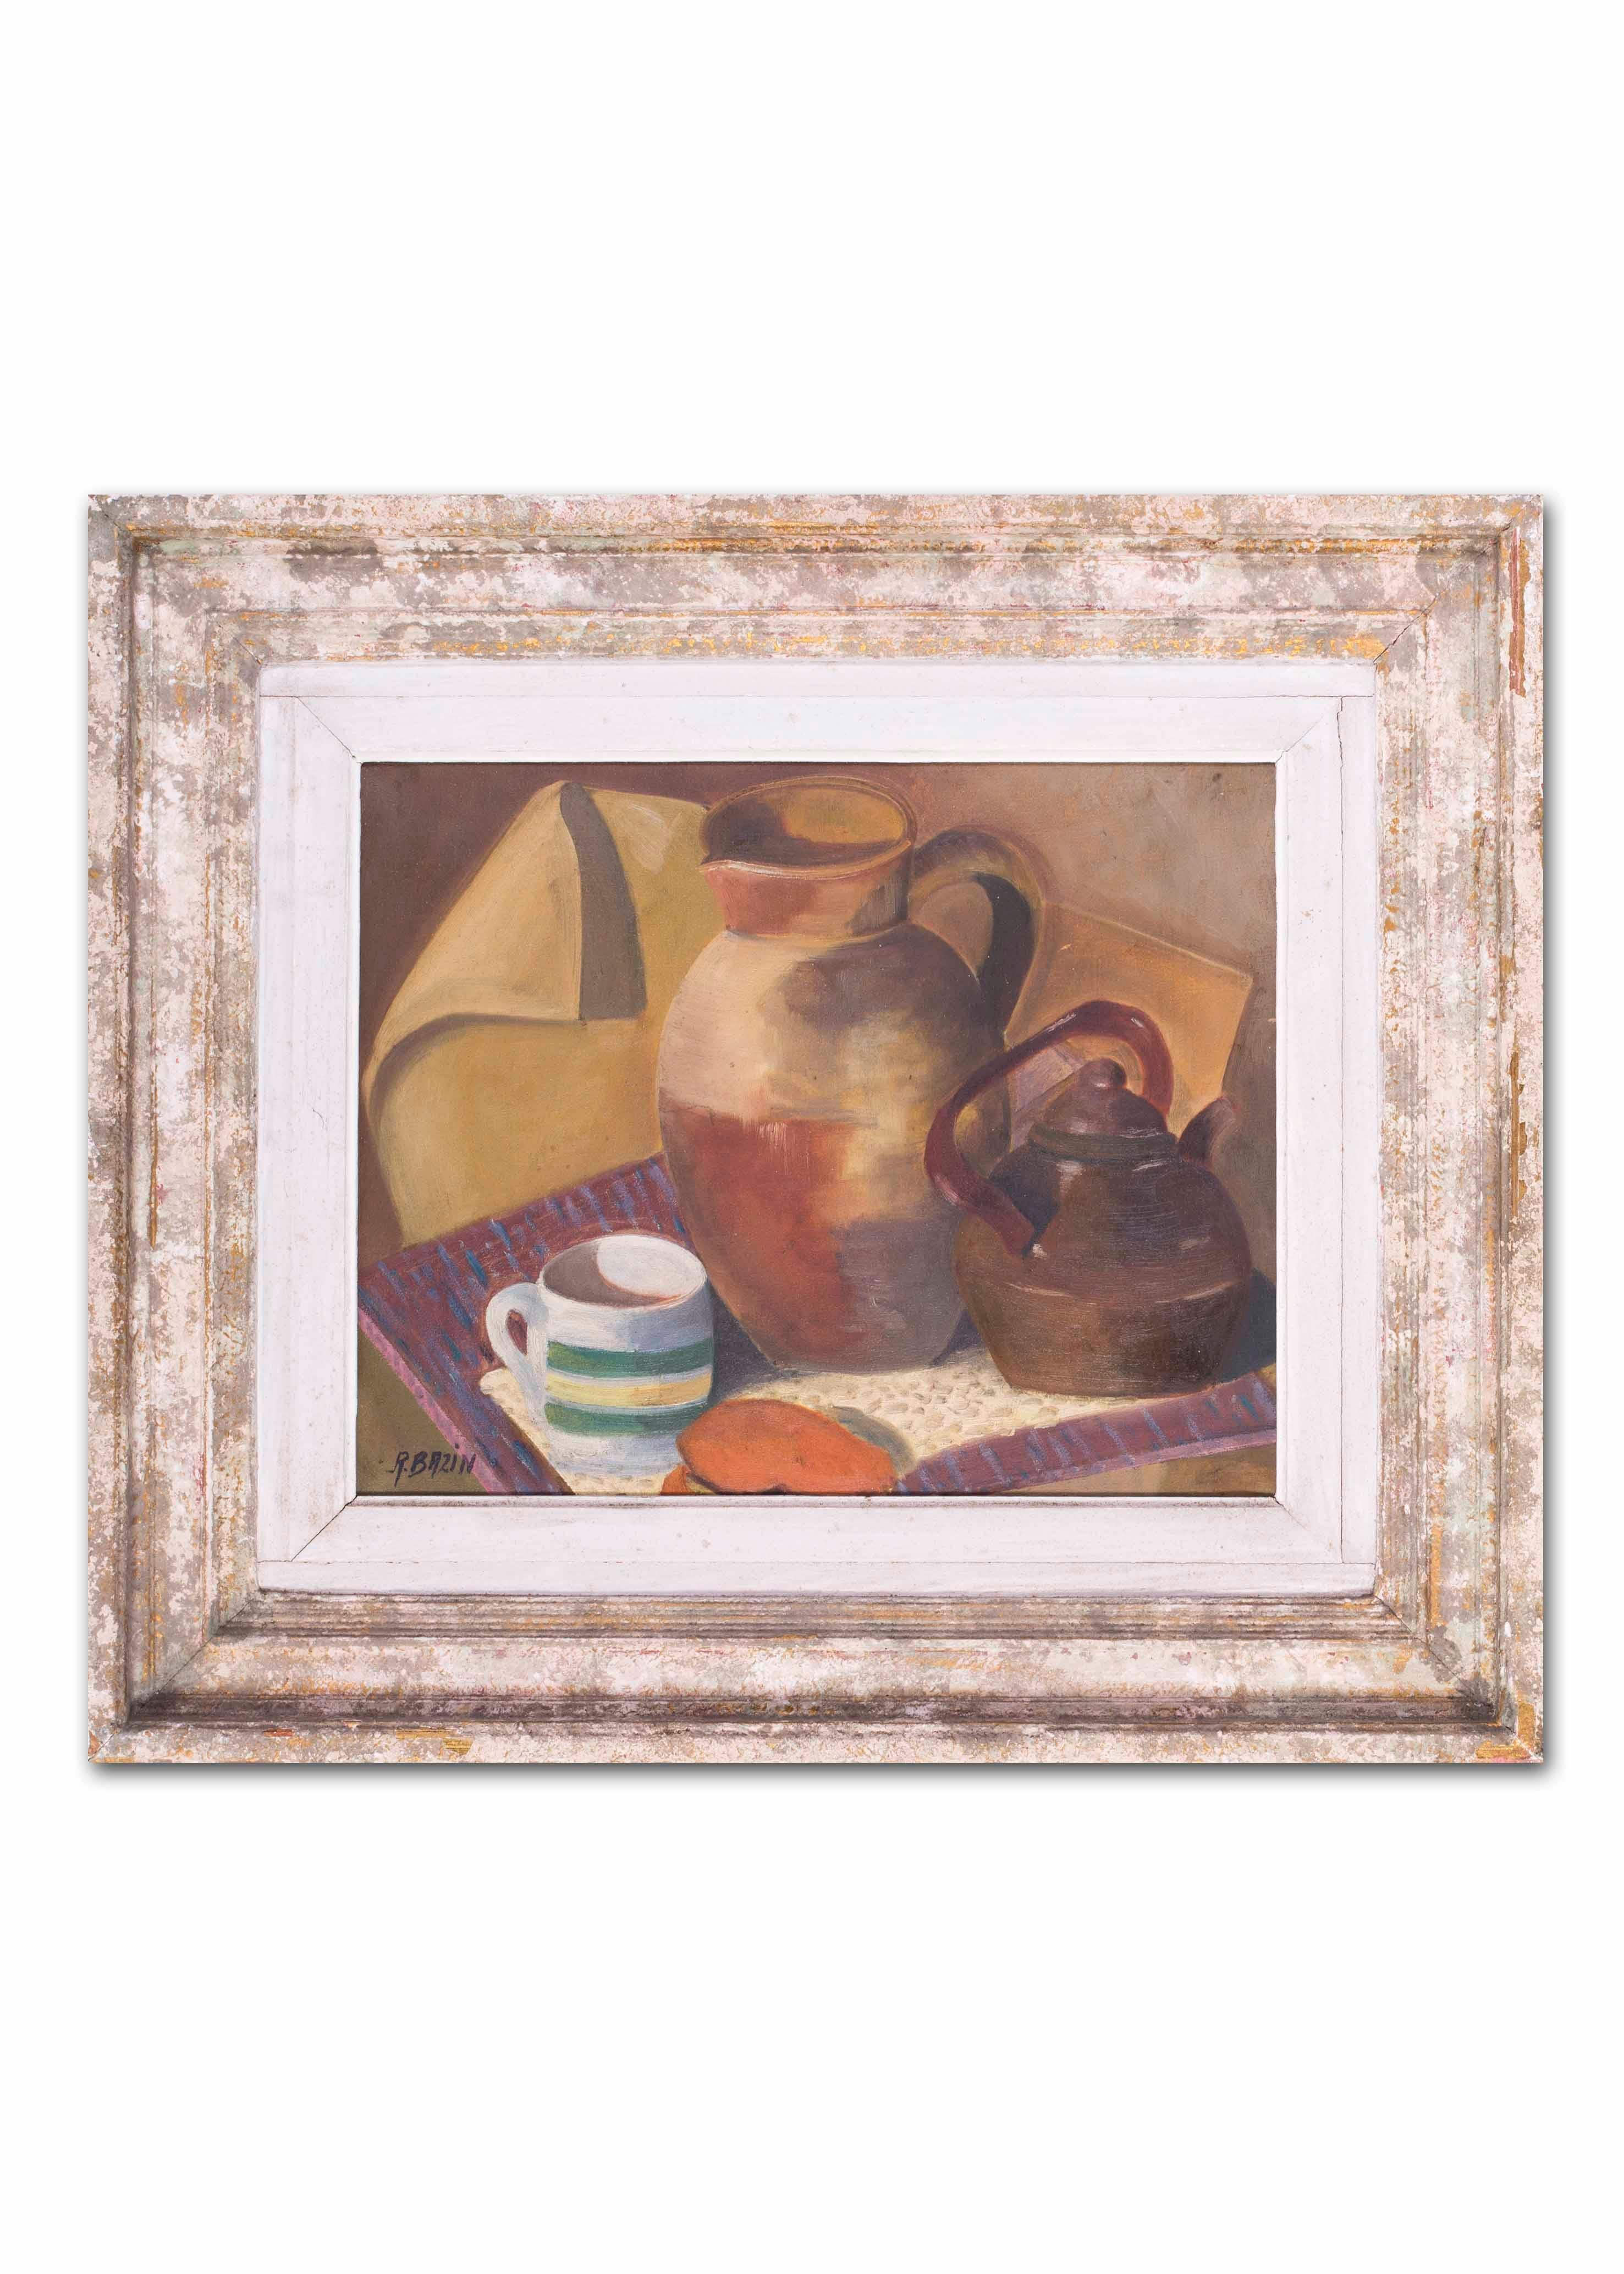 French 20th Century Post Impressionist still life of kettle, cup and jug - Post-Impressionist Painting by Unknown